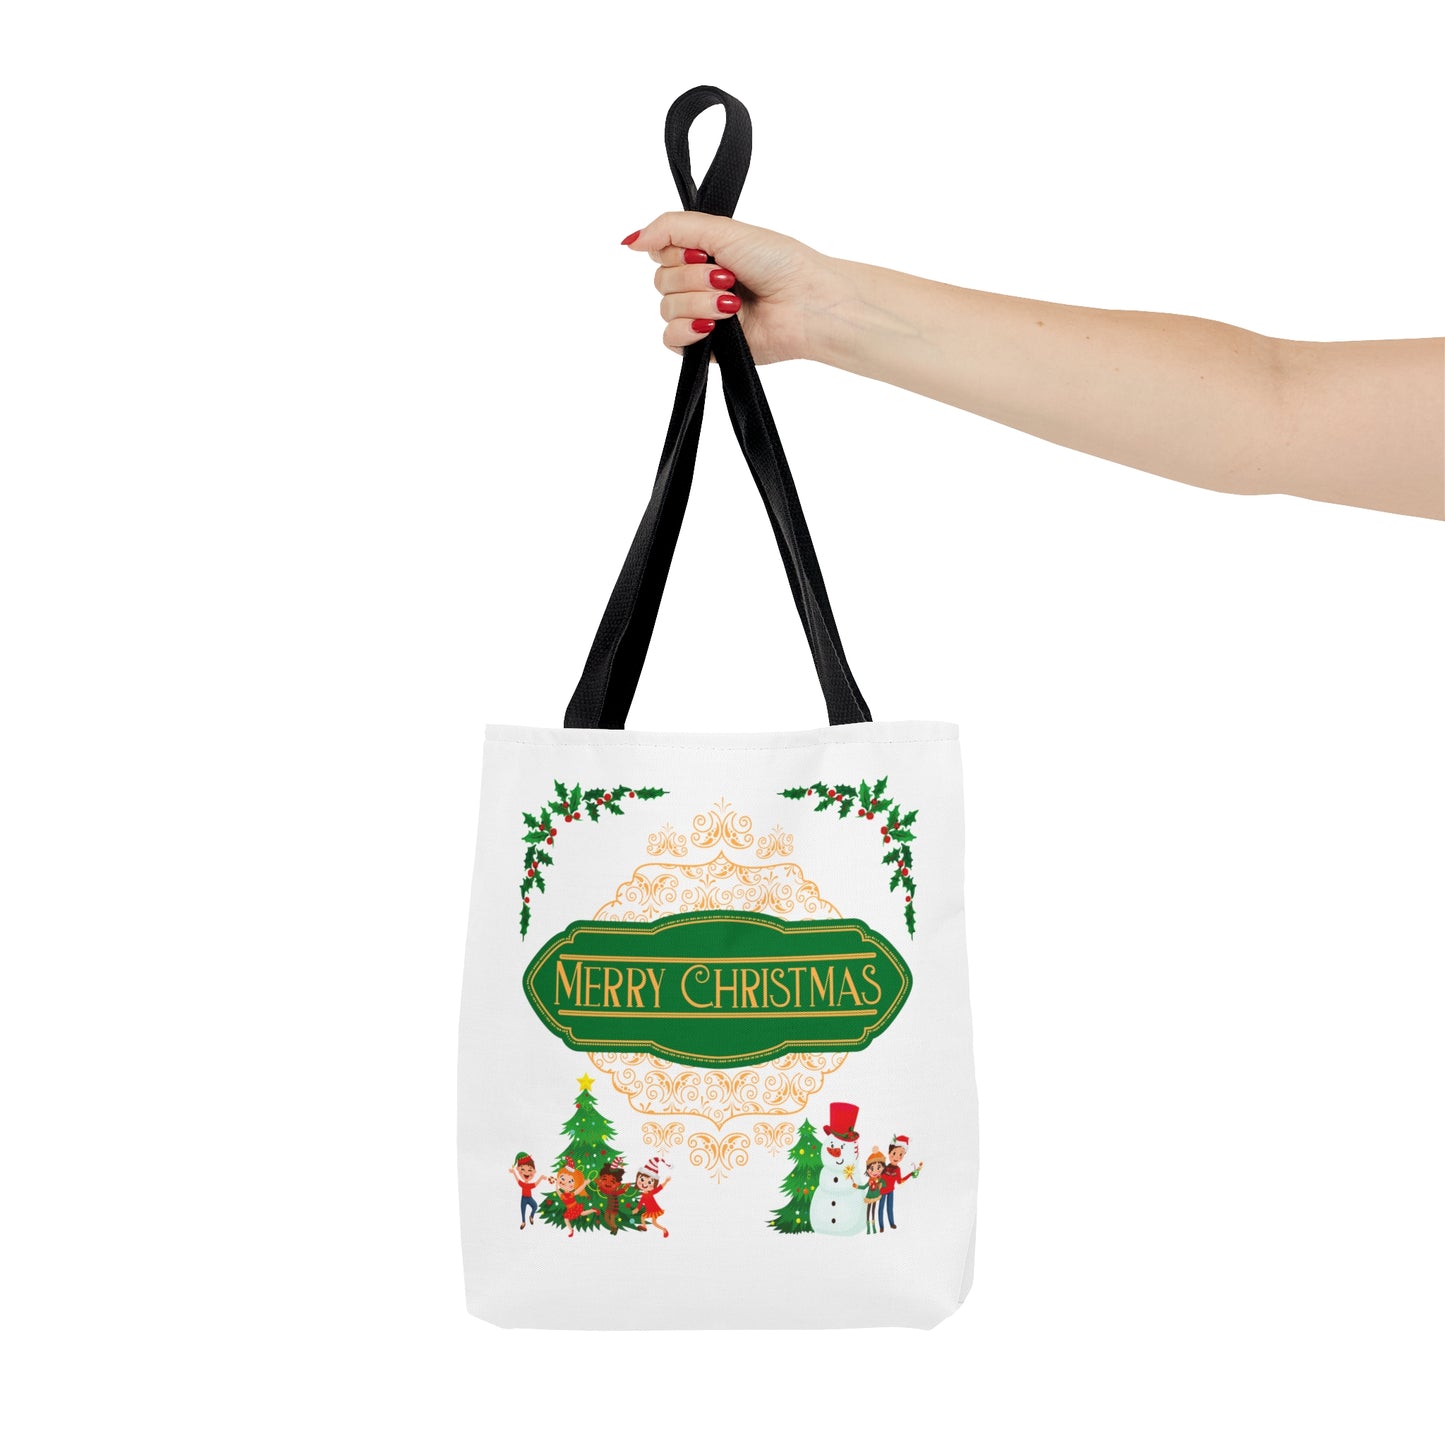 Merry Christmas Printed Tote Bags, in Green